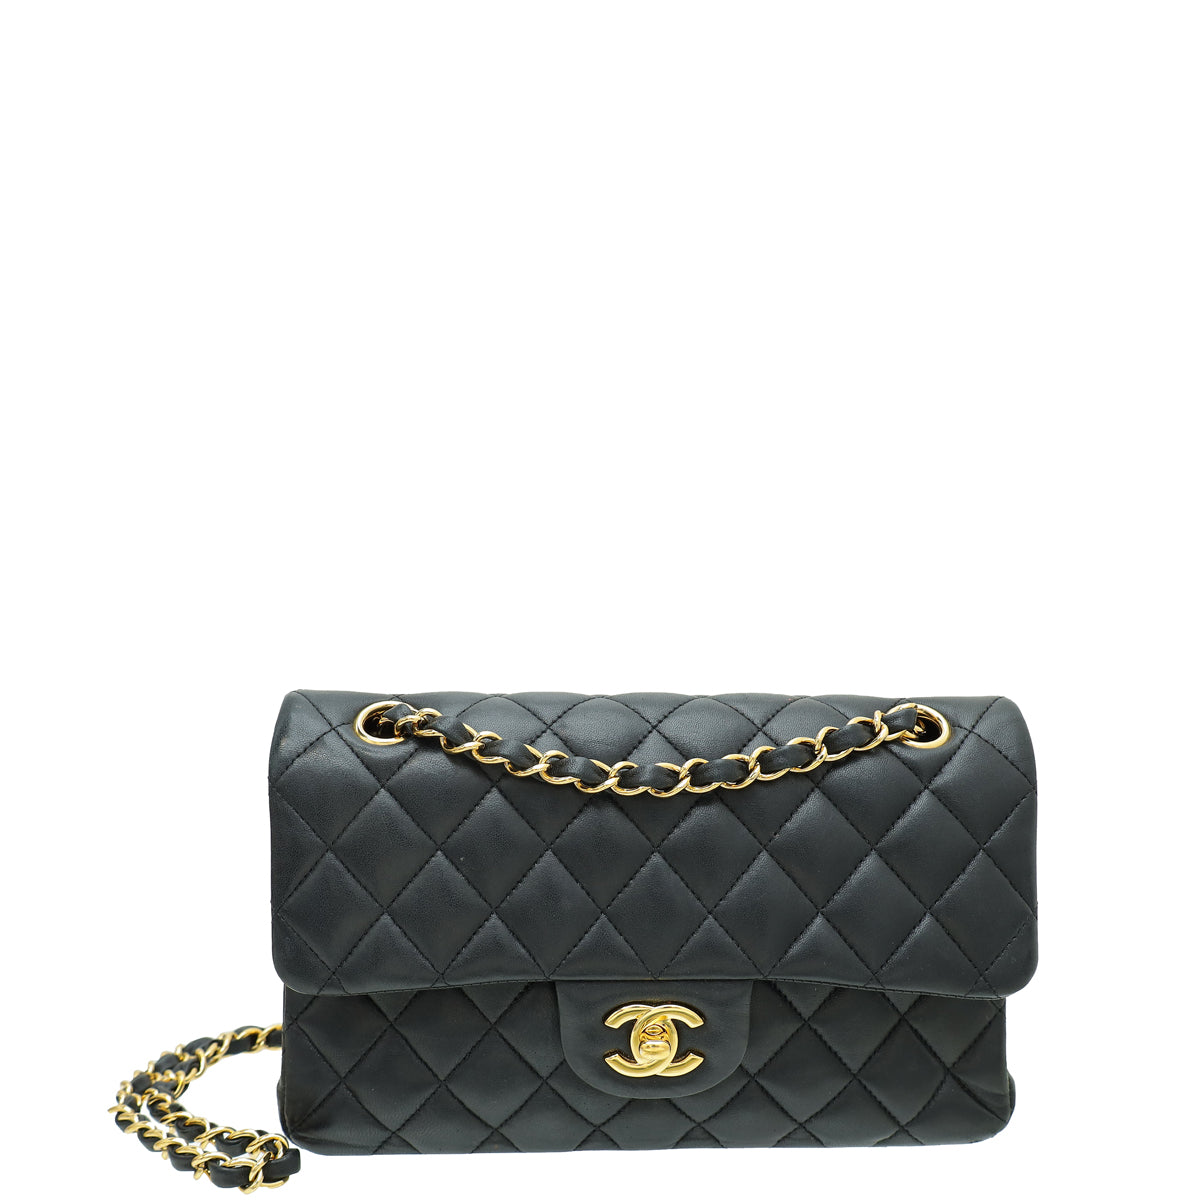 Chanel Black Classic Double Flap Small Bag